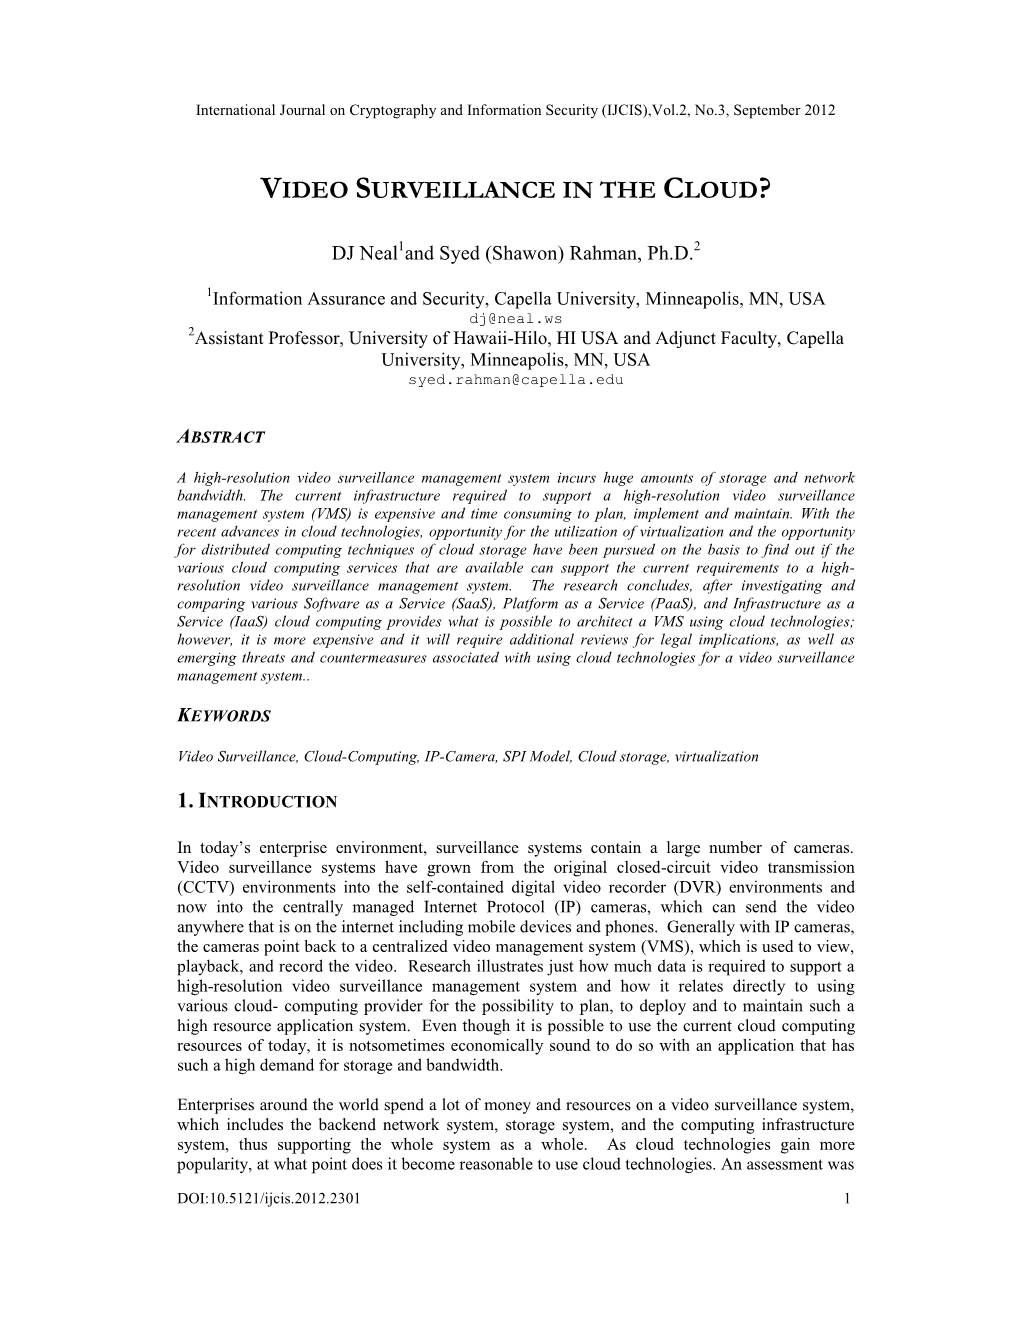 Video Surveillance in the Cloud?